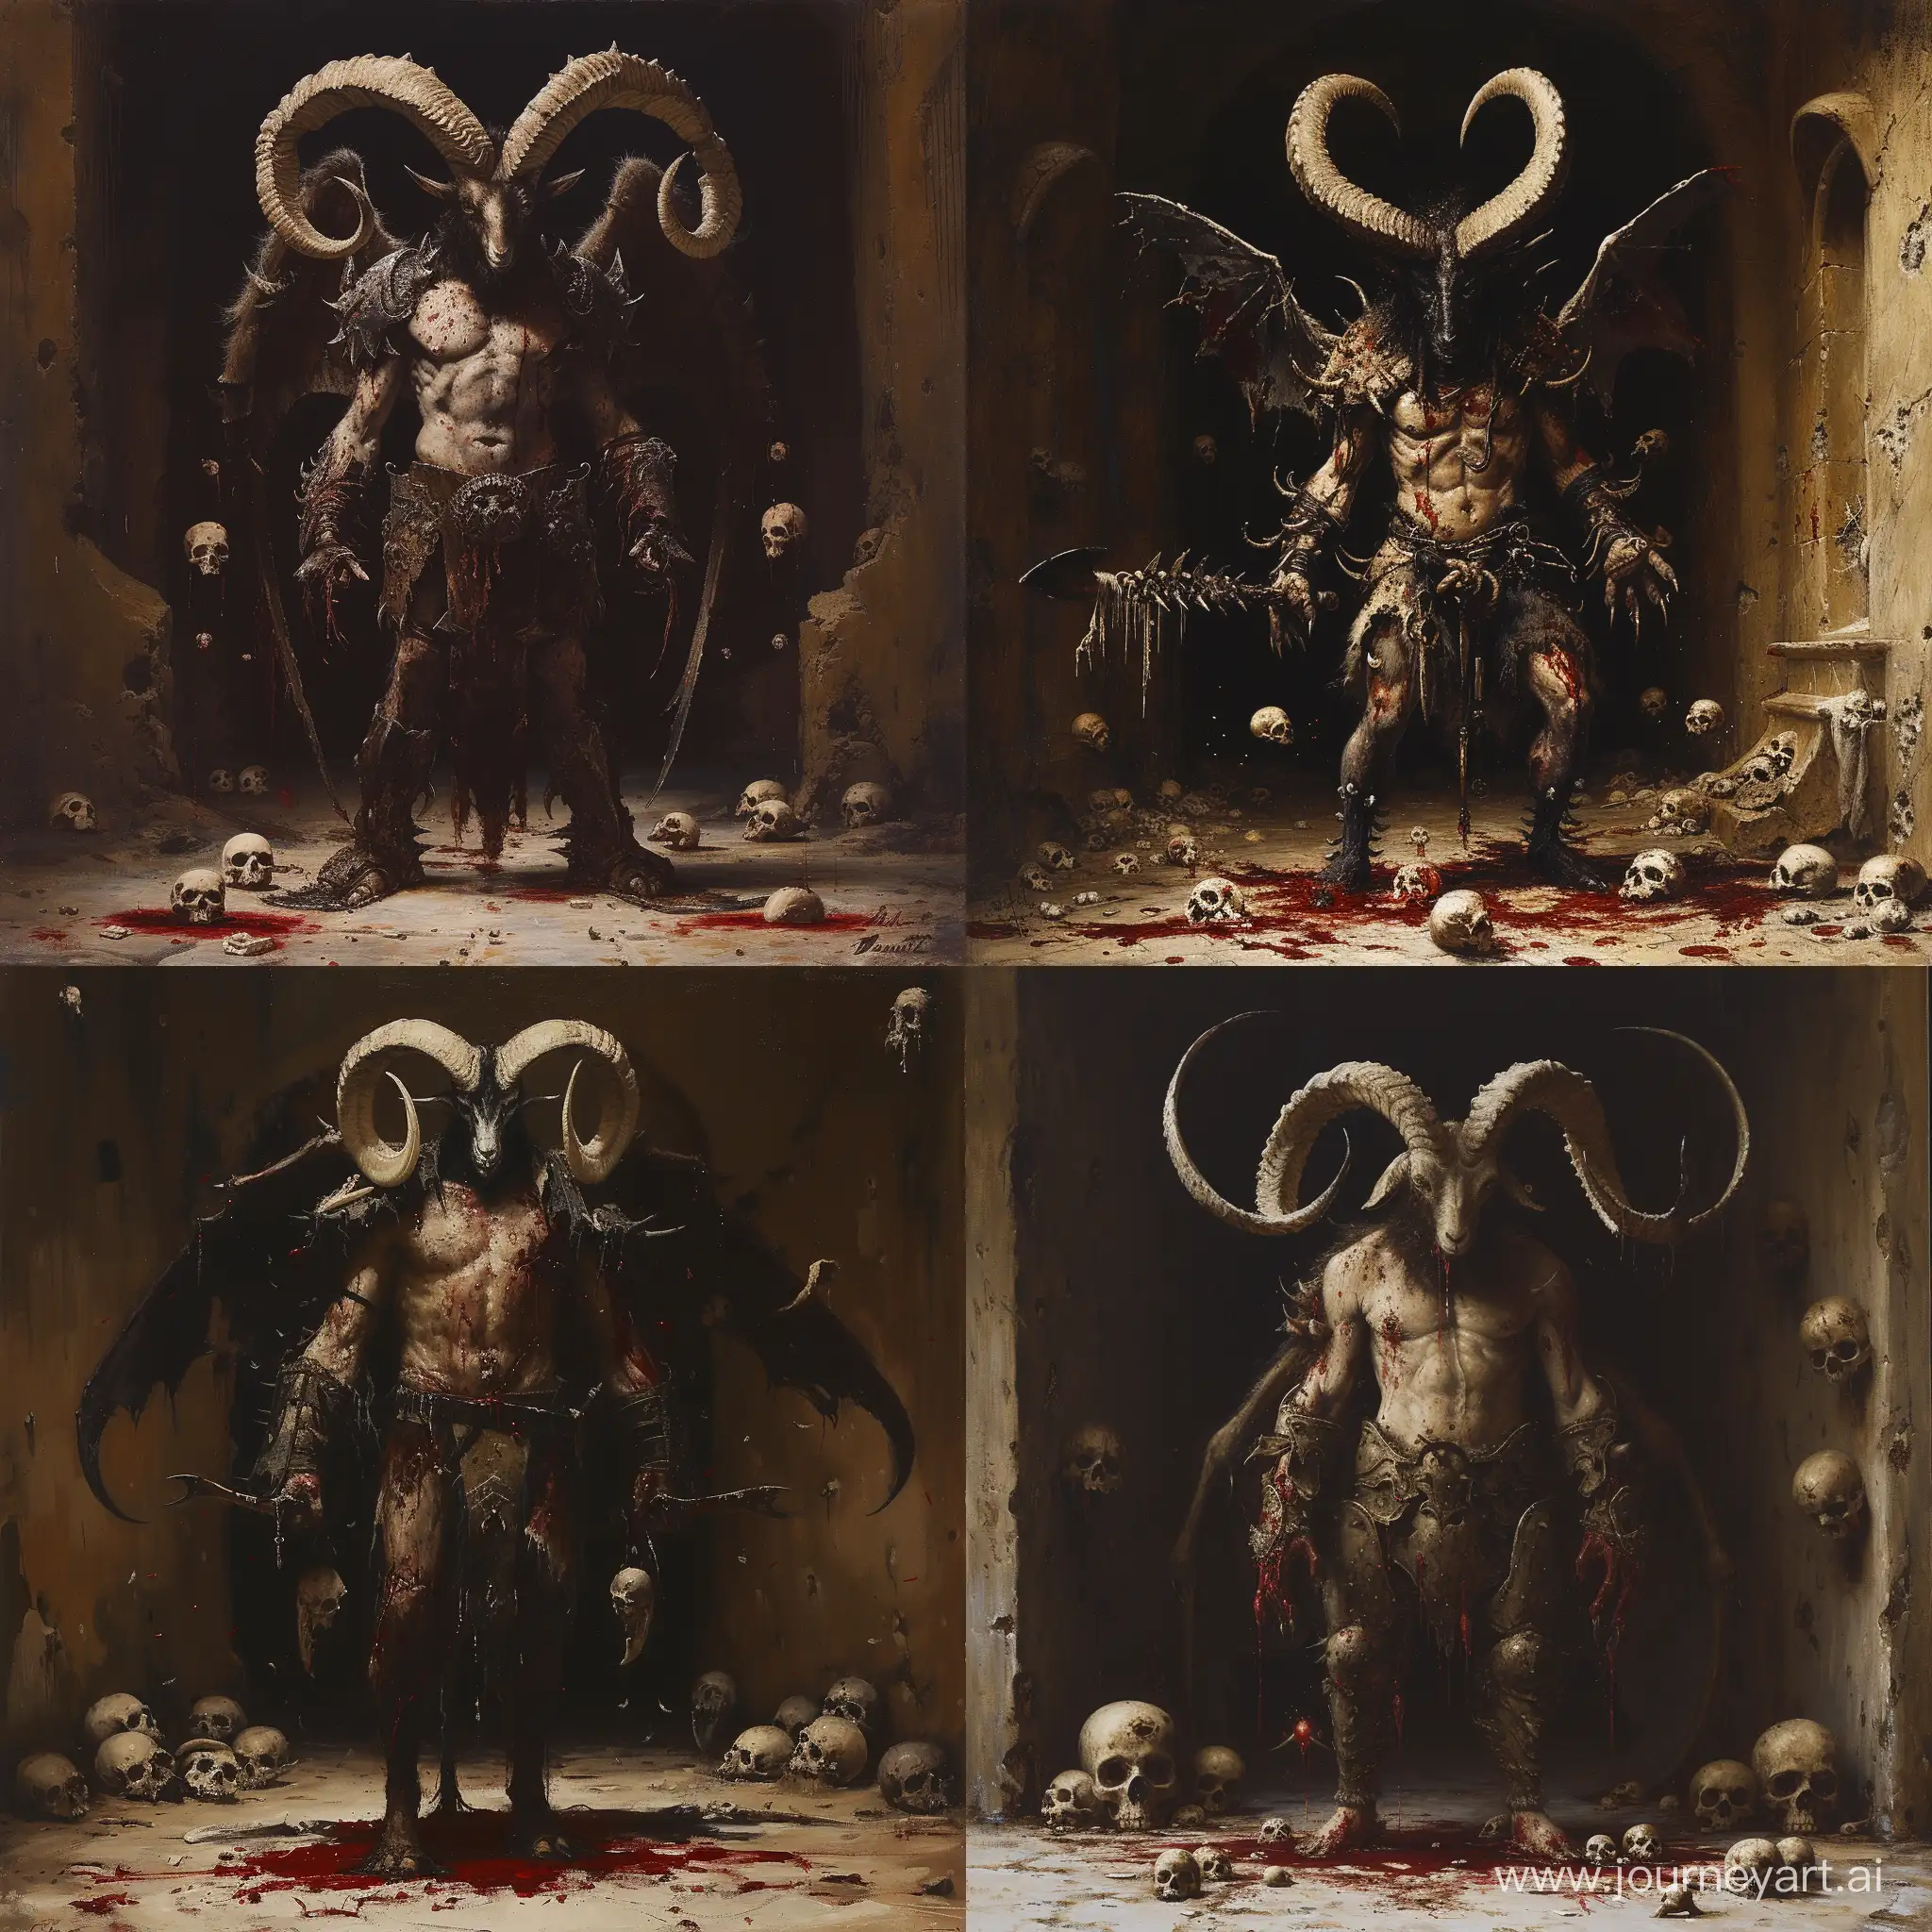 a goat-headed demon with large horns, strong and strong upper body, demon skins, skins, ((claws, wings)), demonic armor, blood splatters, skulls on the ground, standing in a blood ritual, medieval, dark room, dim light, masterpiece, realistic, oil painting